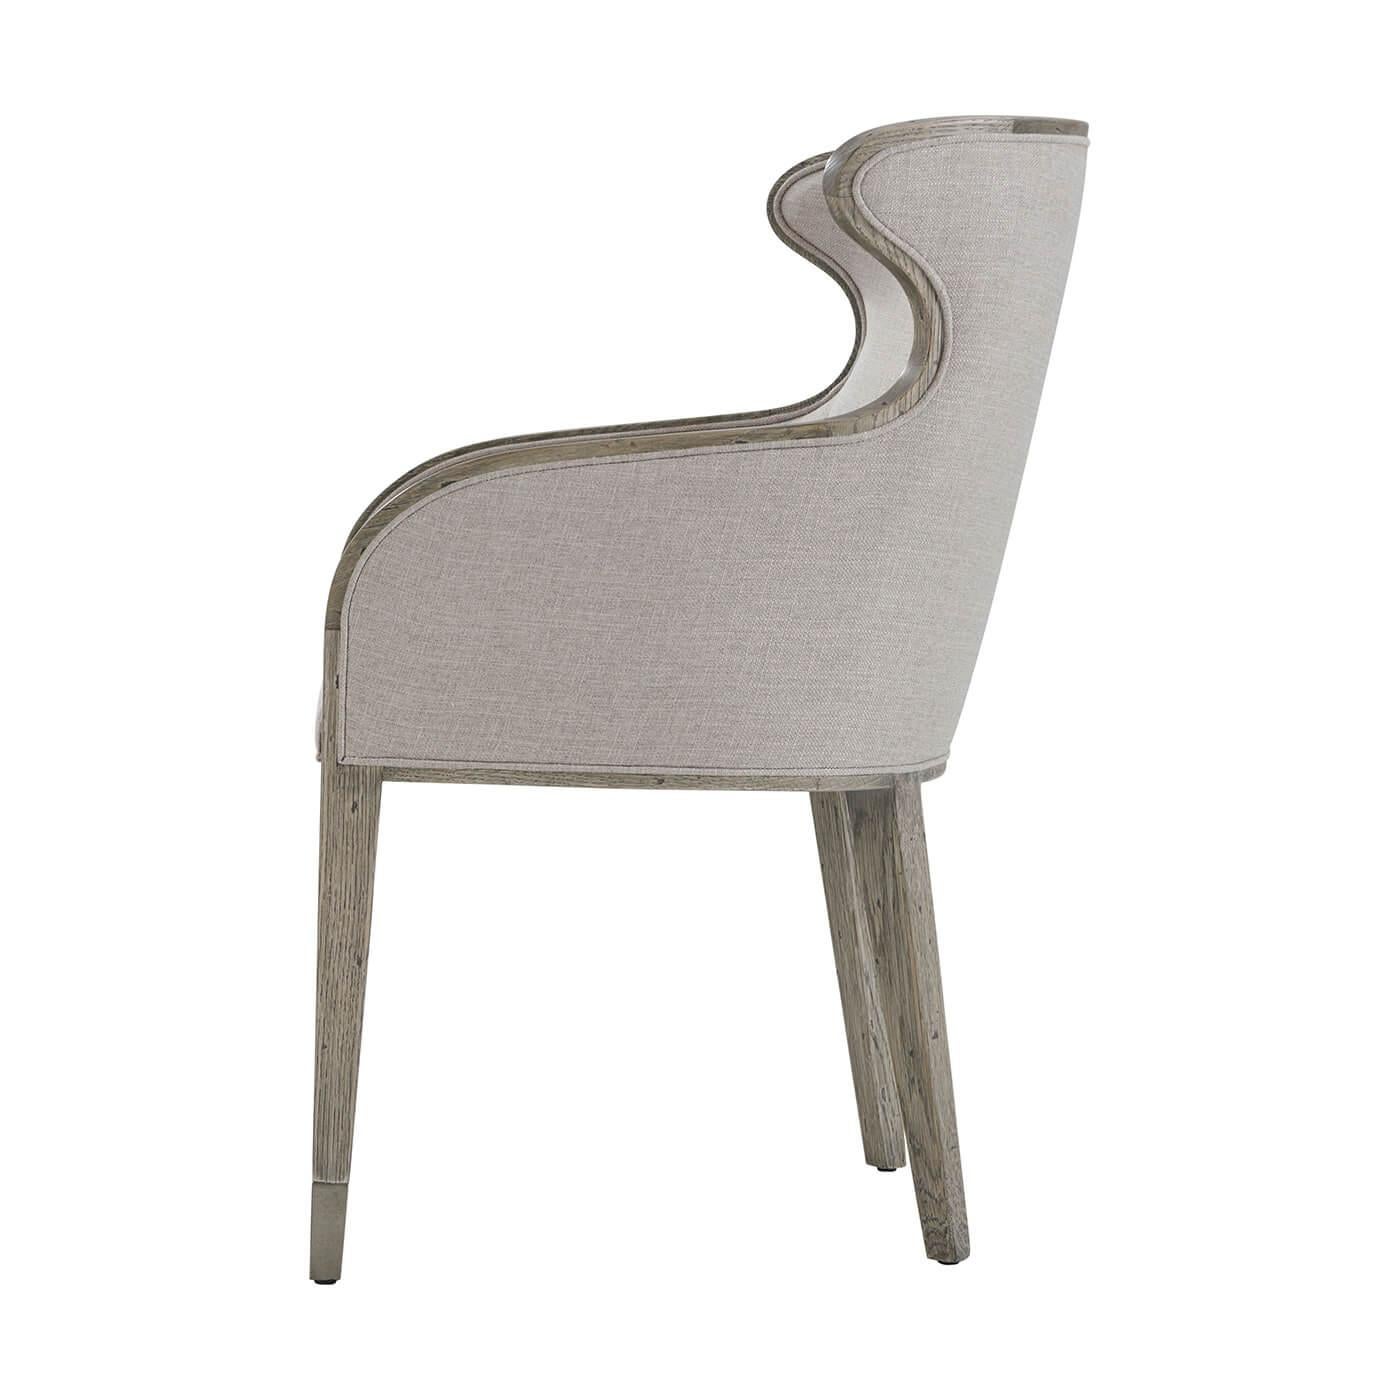 A modern scoop back upholstered dining chair with a greyed rustic oak finished frame, the organic wing back with a pierced handle and tight upholstered cushion seat, on square tapered legs with a textured vintage metal cap foot.

Dimensions: 23.5